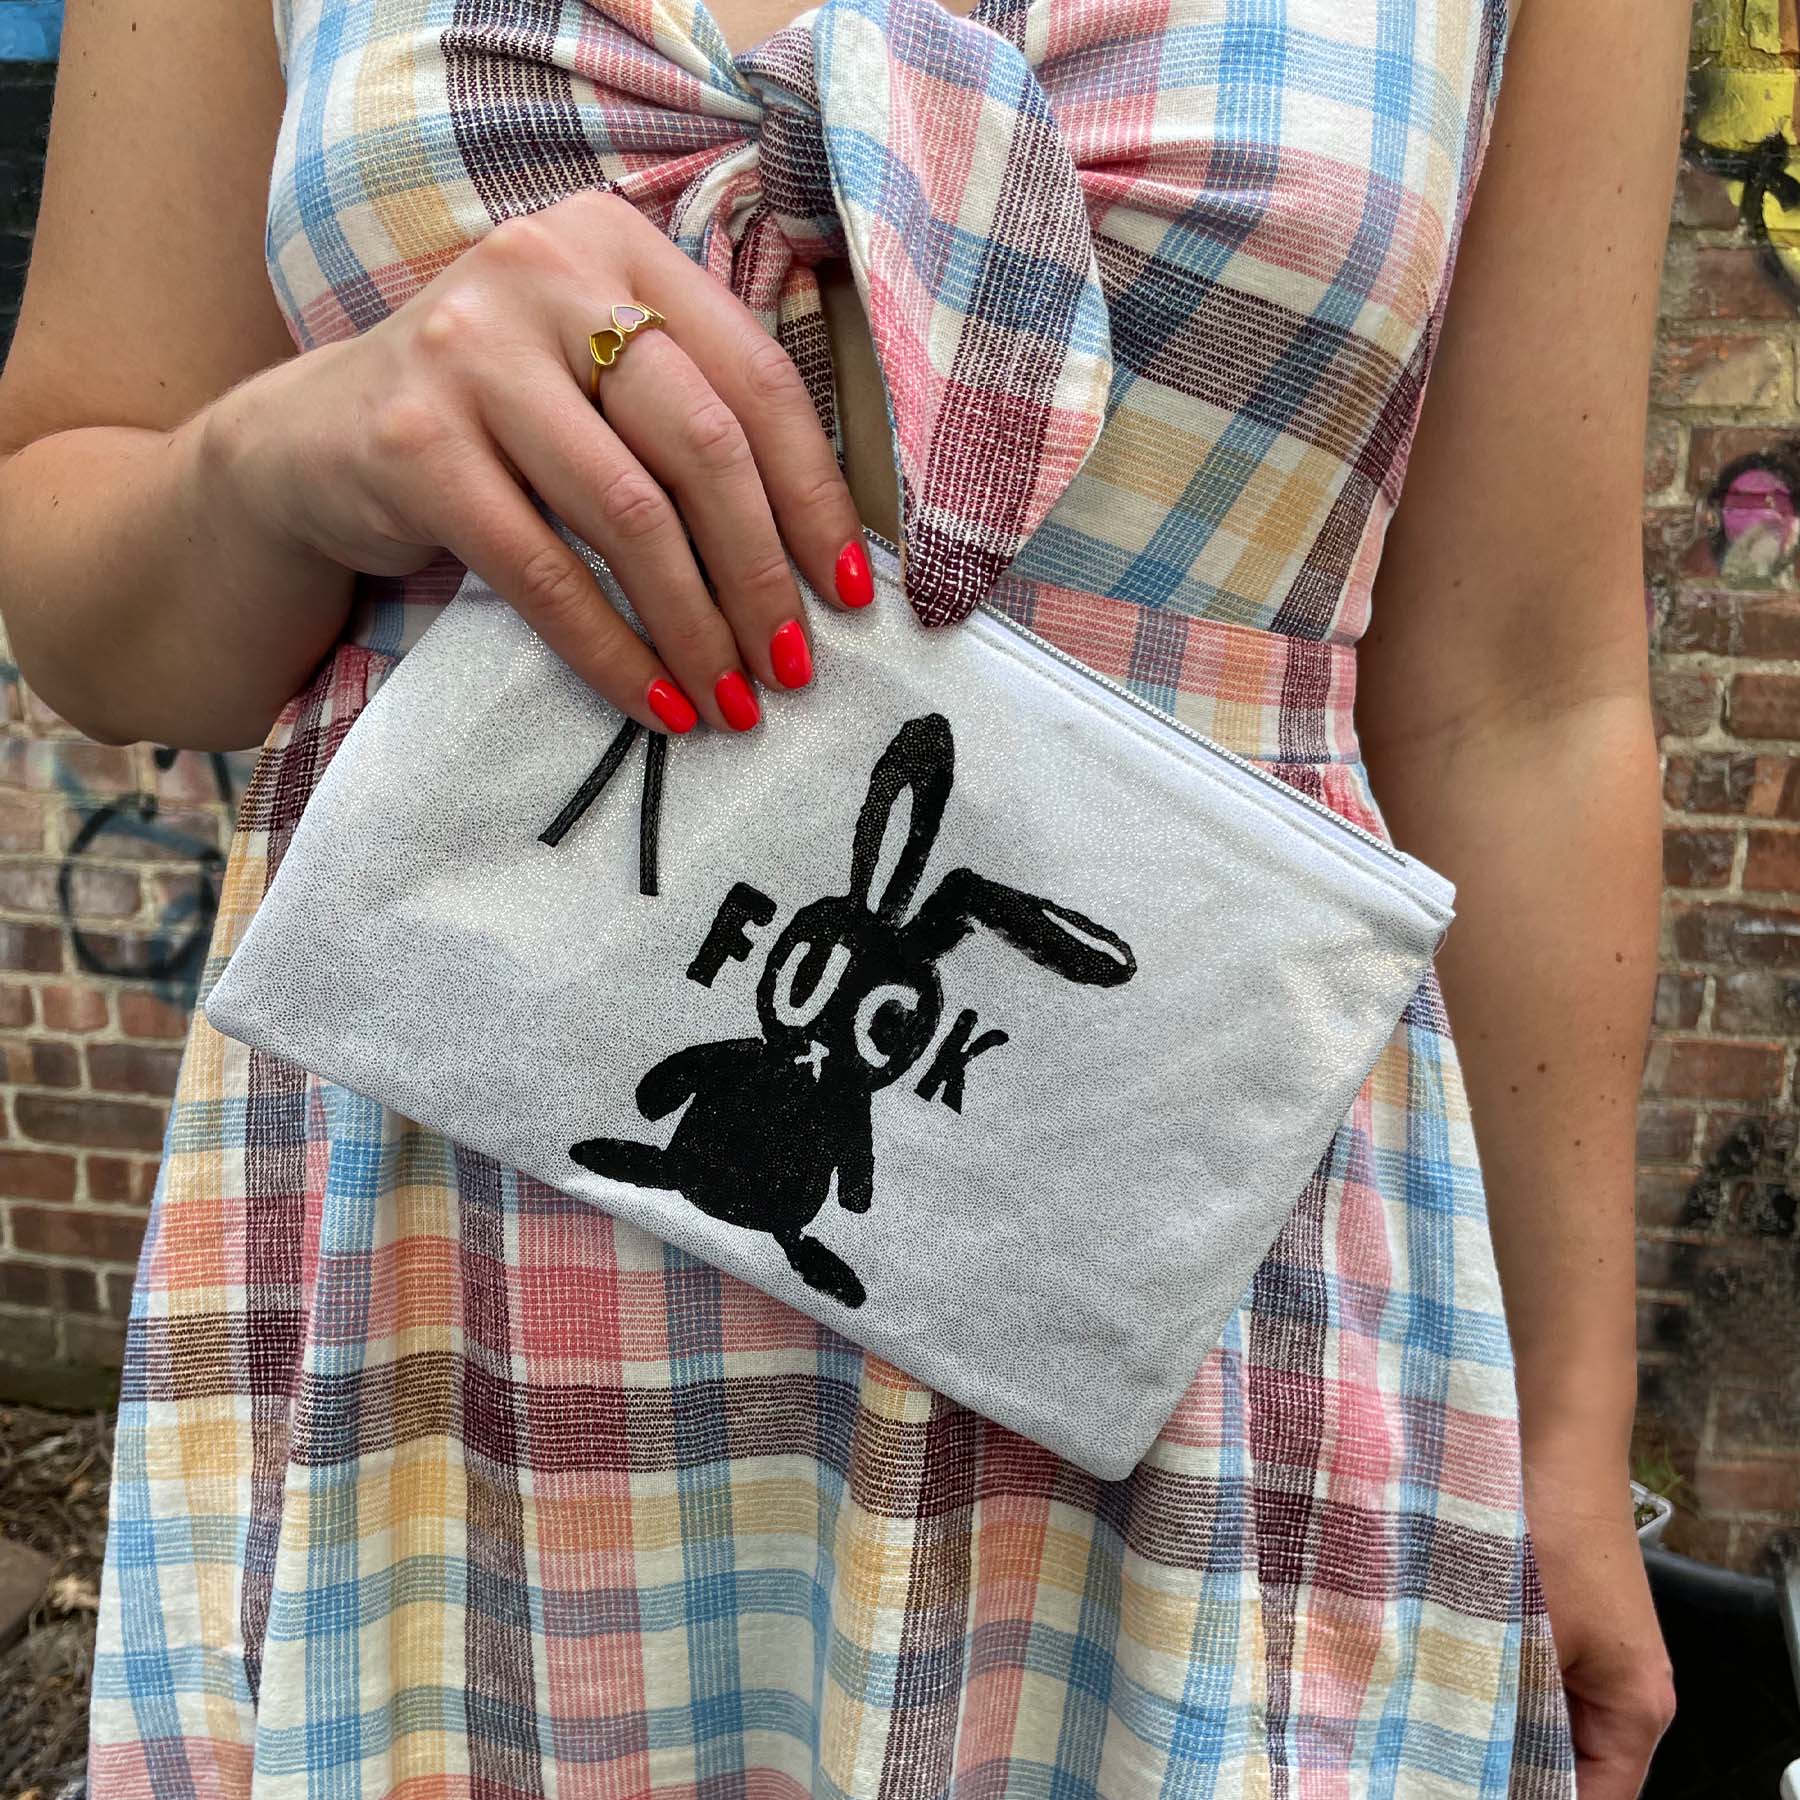 she-bang is upcycled handmade unique handbags, recycled denim bags, handmade genuine leather bags,  completely one of a kind fuck bunny  bags made by local brooklyn designers.